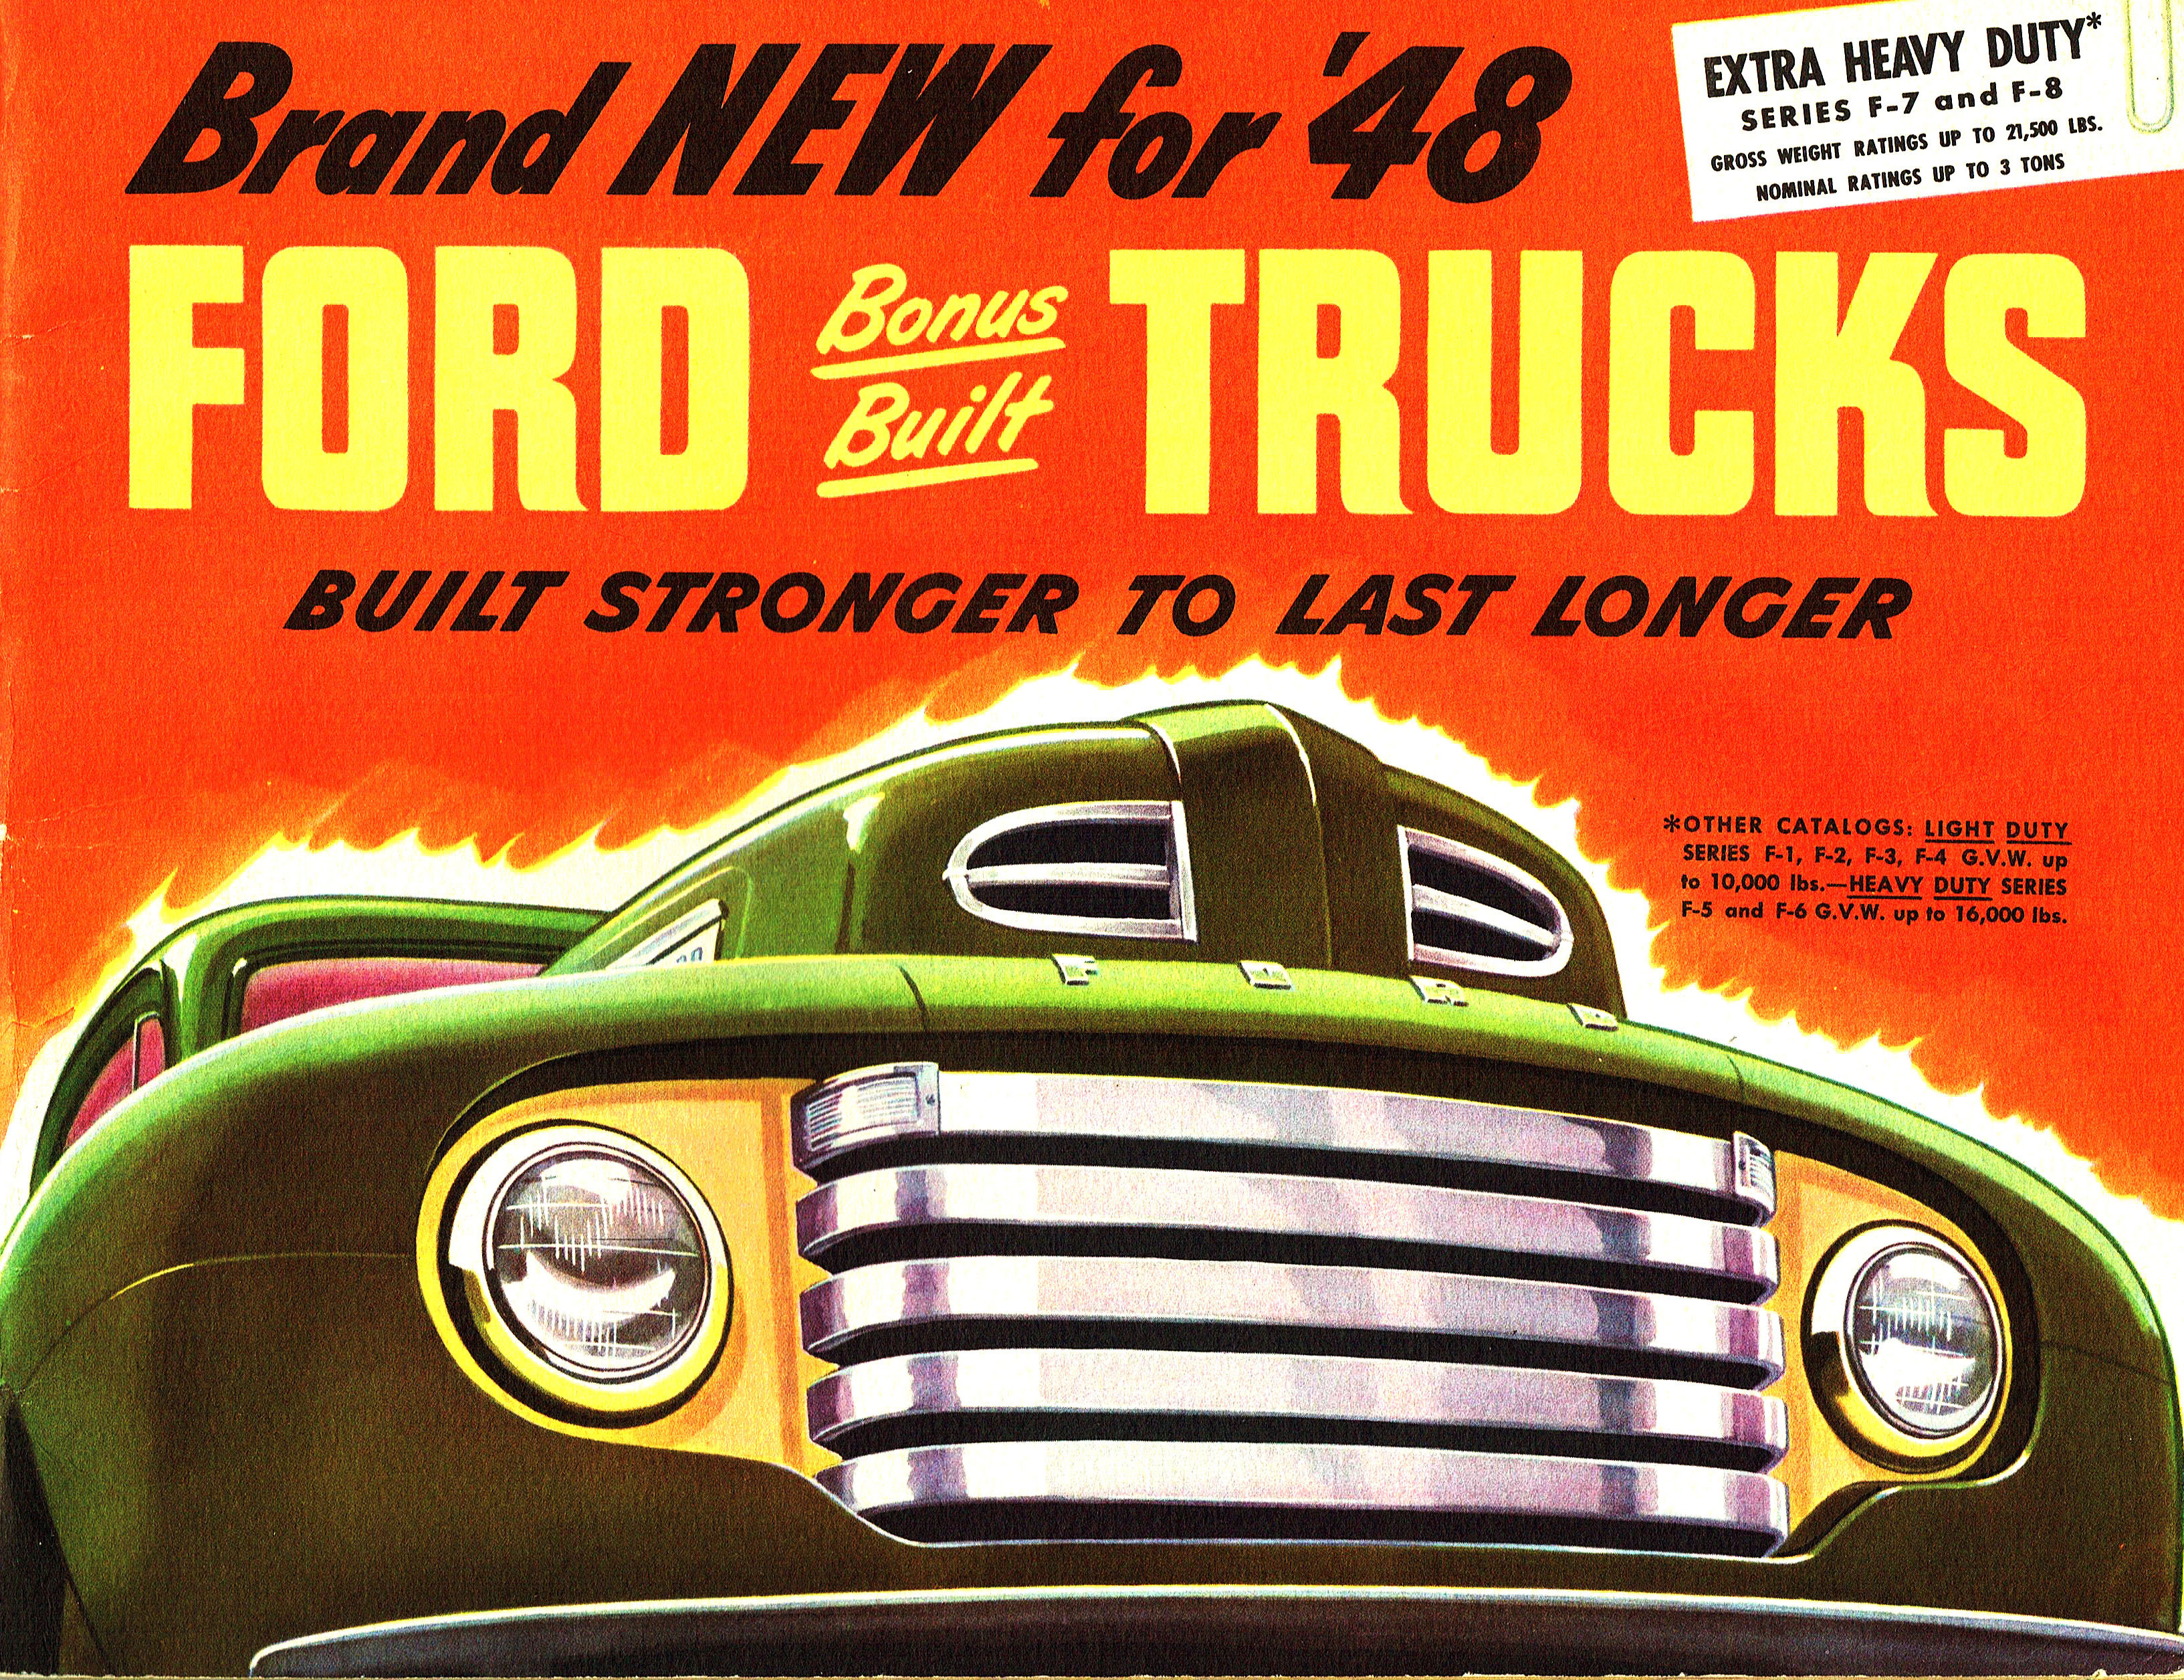 1948 Ford Extra Heavy Duty (1) 280mm x 216mm